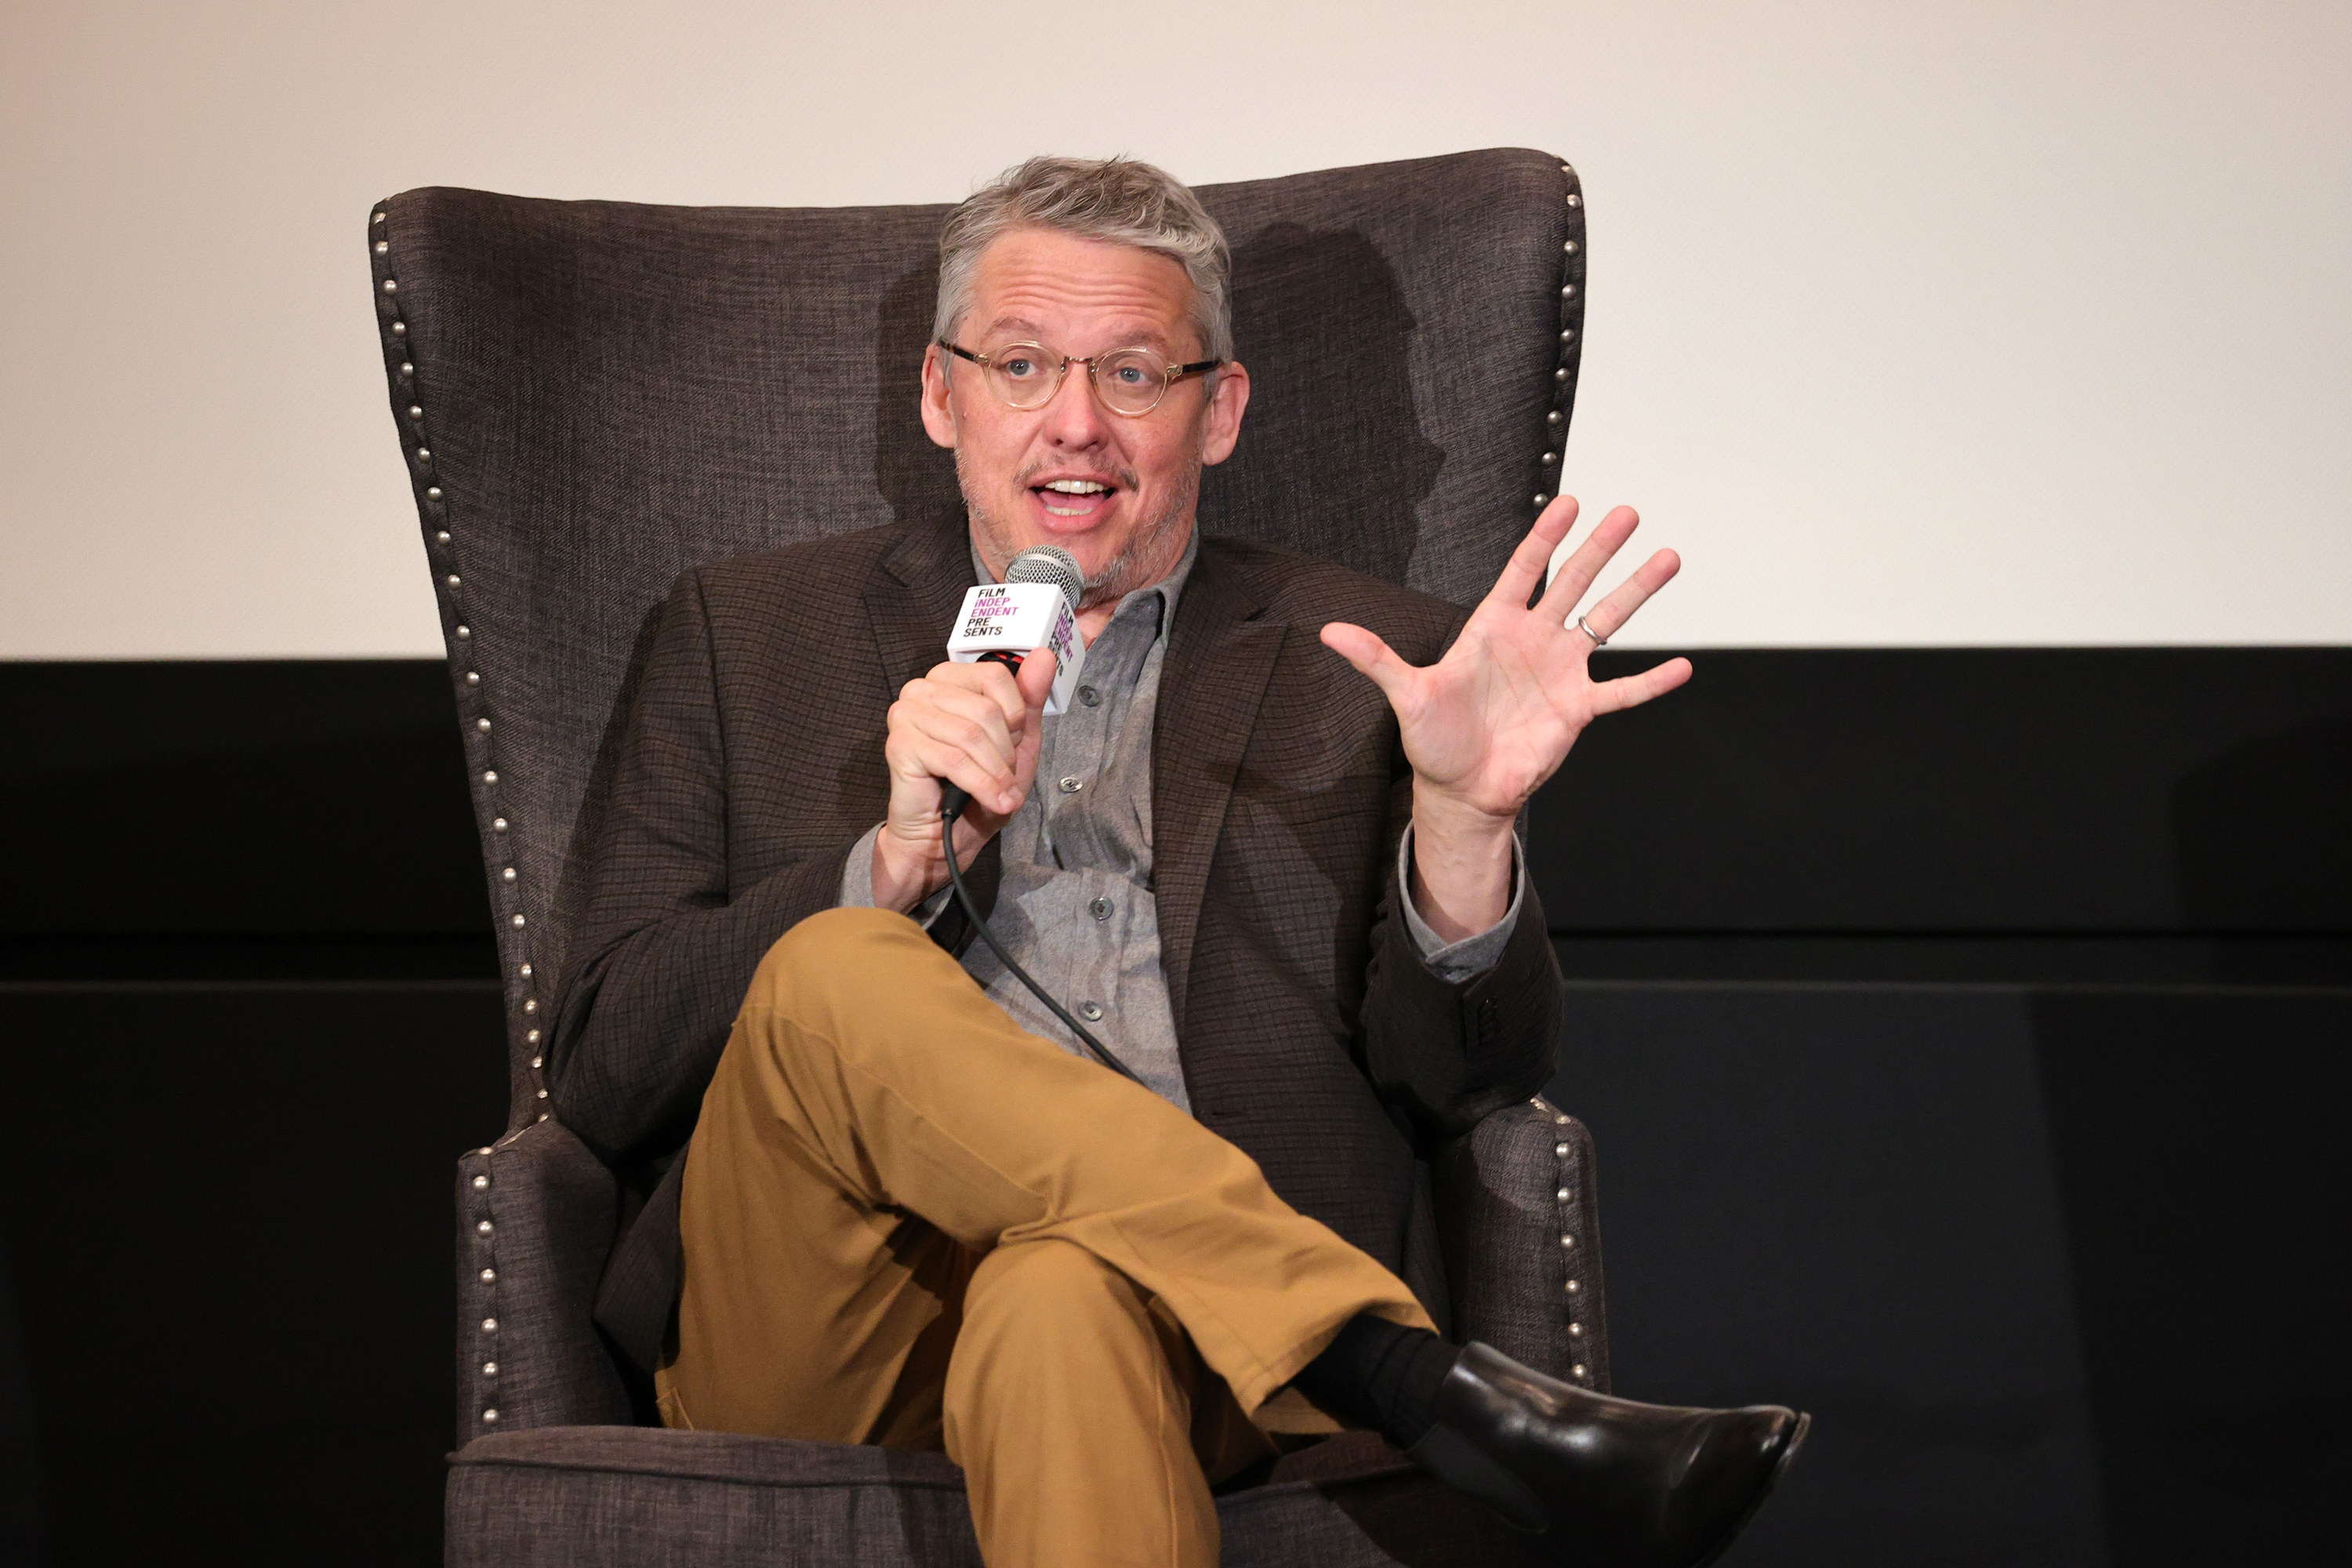 Adam McKay sitting in a chair and speaking into a microphone